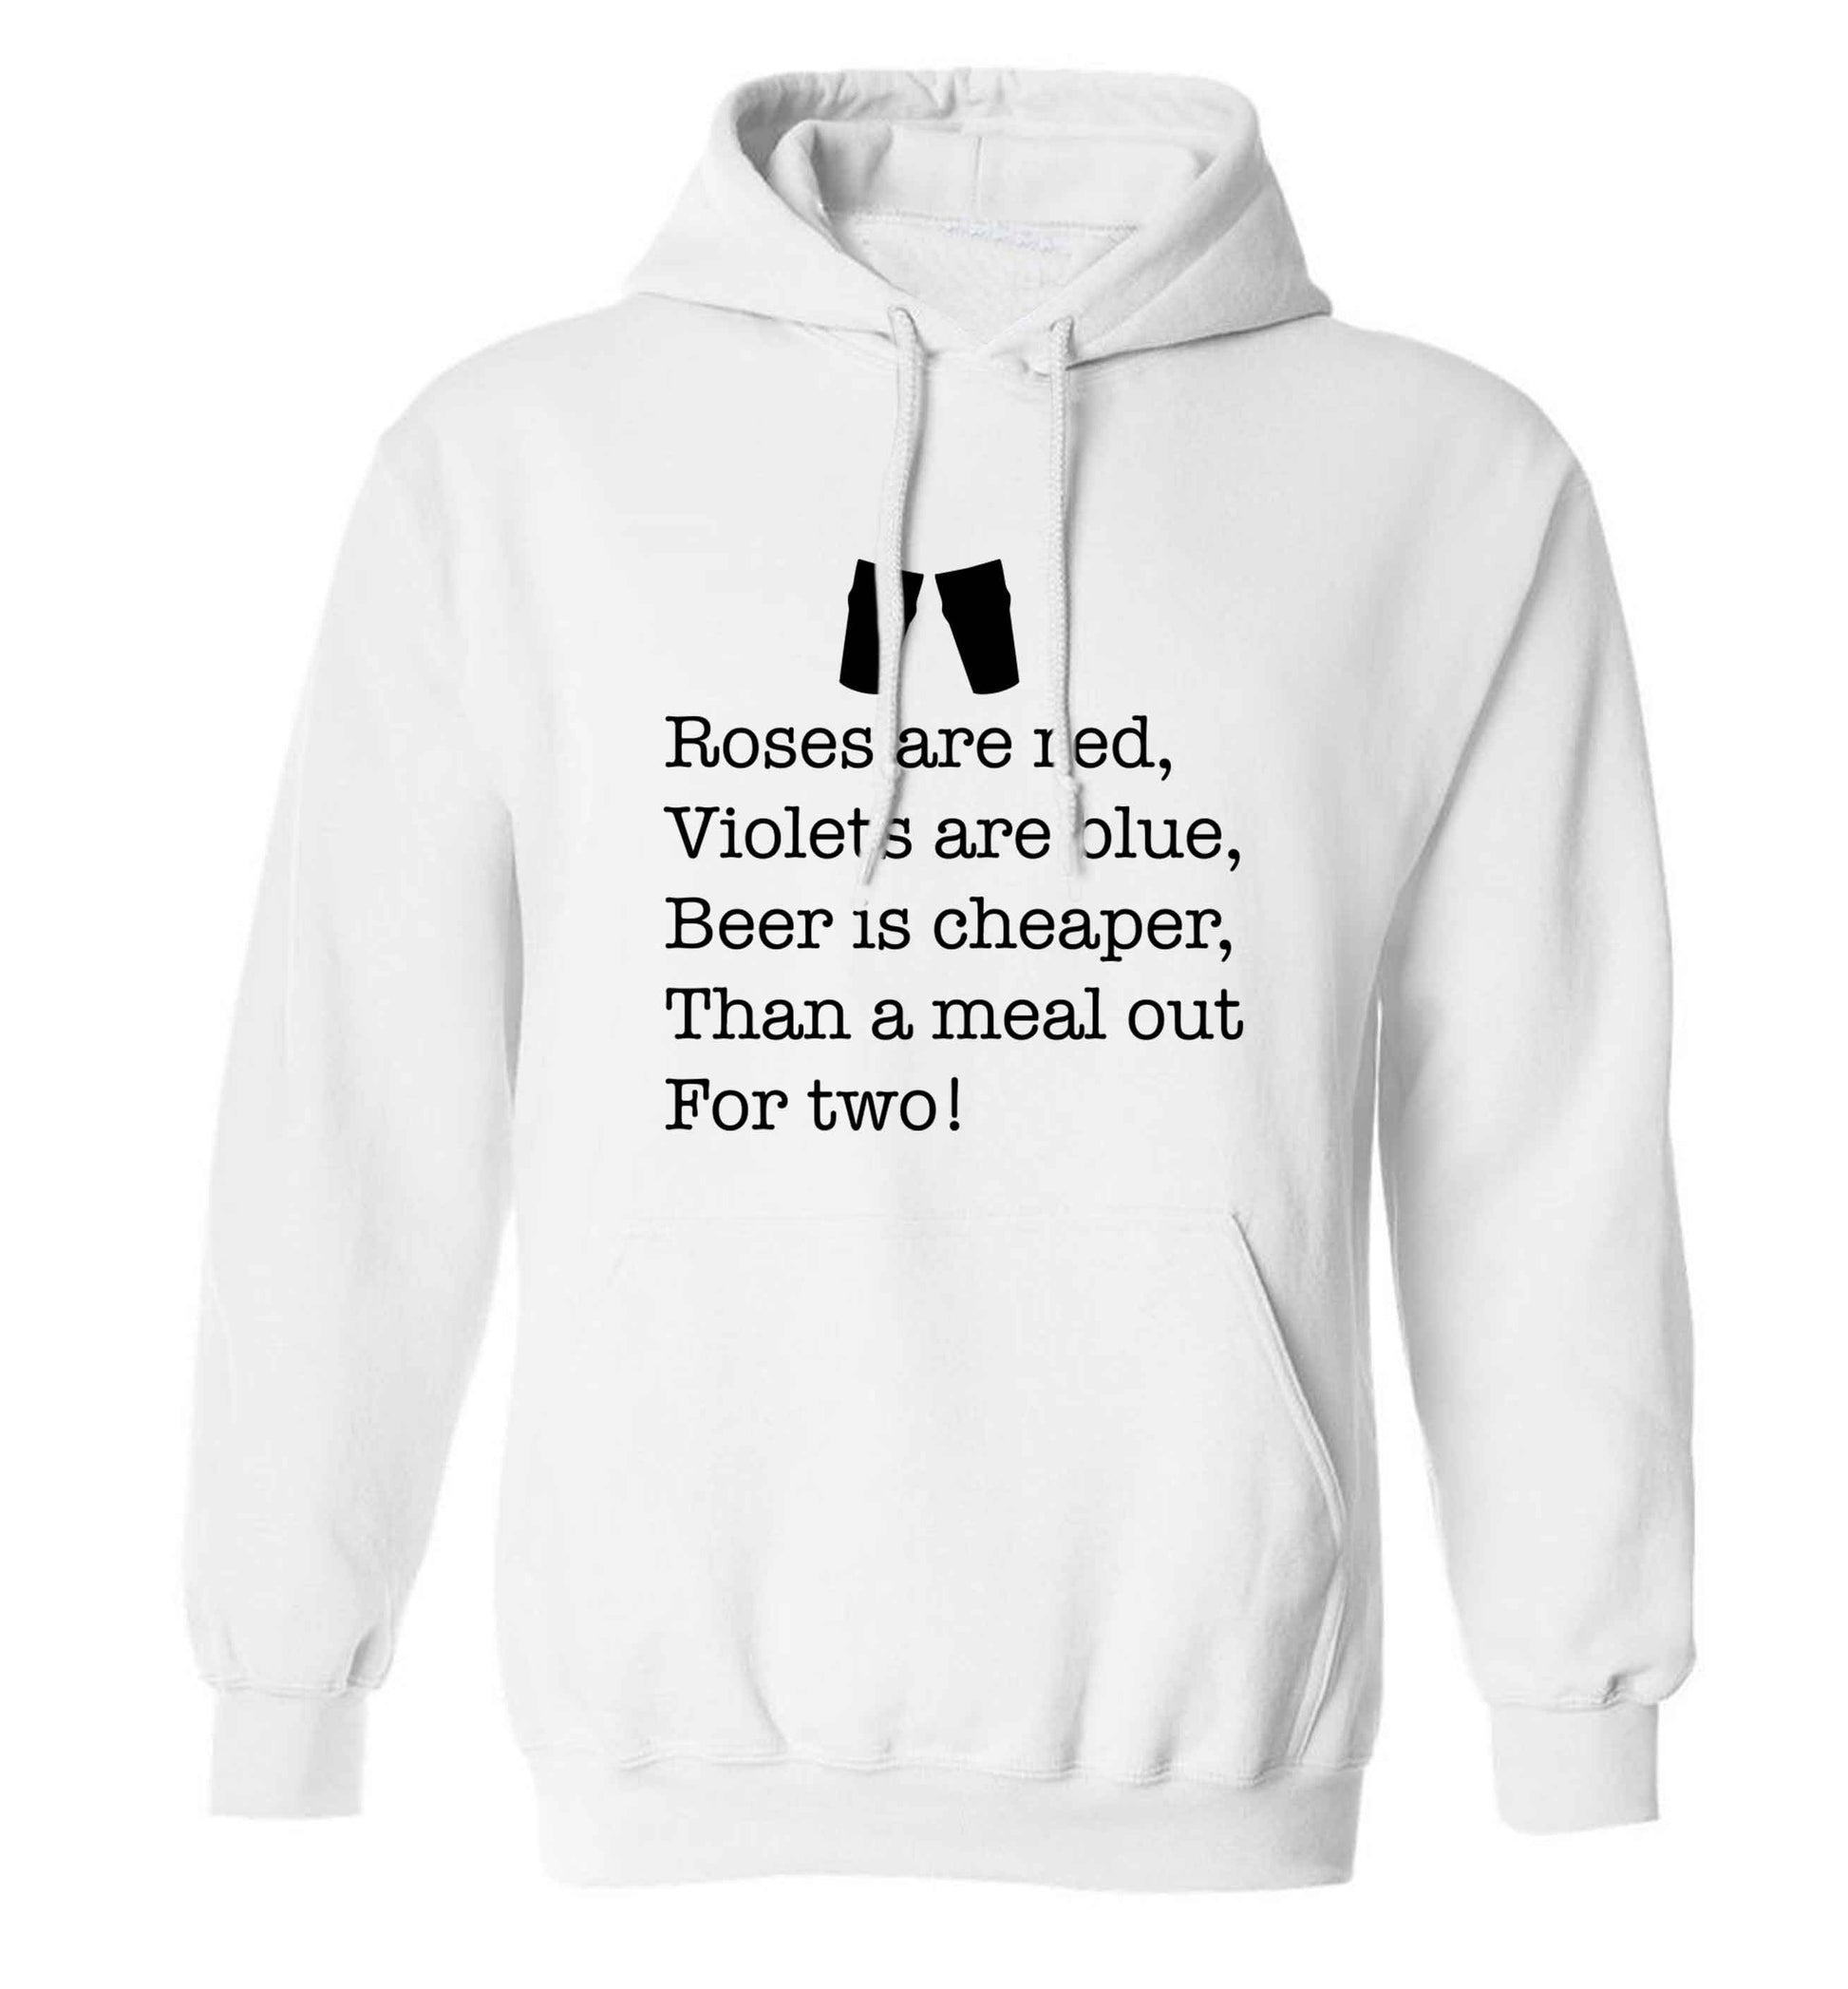 Roses are red violets are blue beer is cheaper than a meal out for two adults unisex white hoodie 2XL